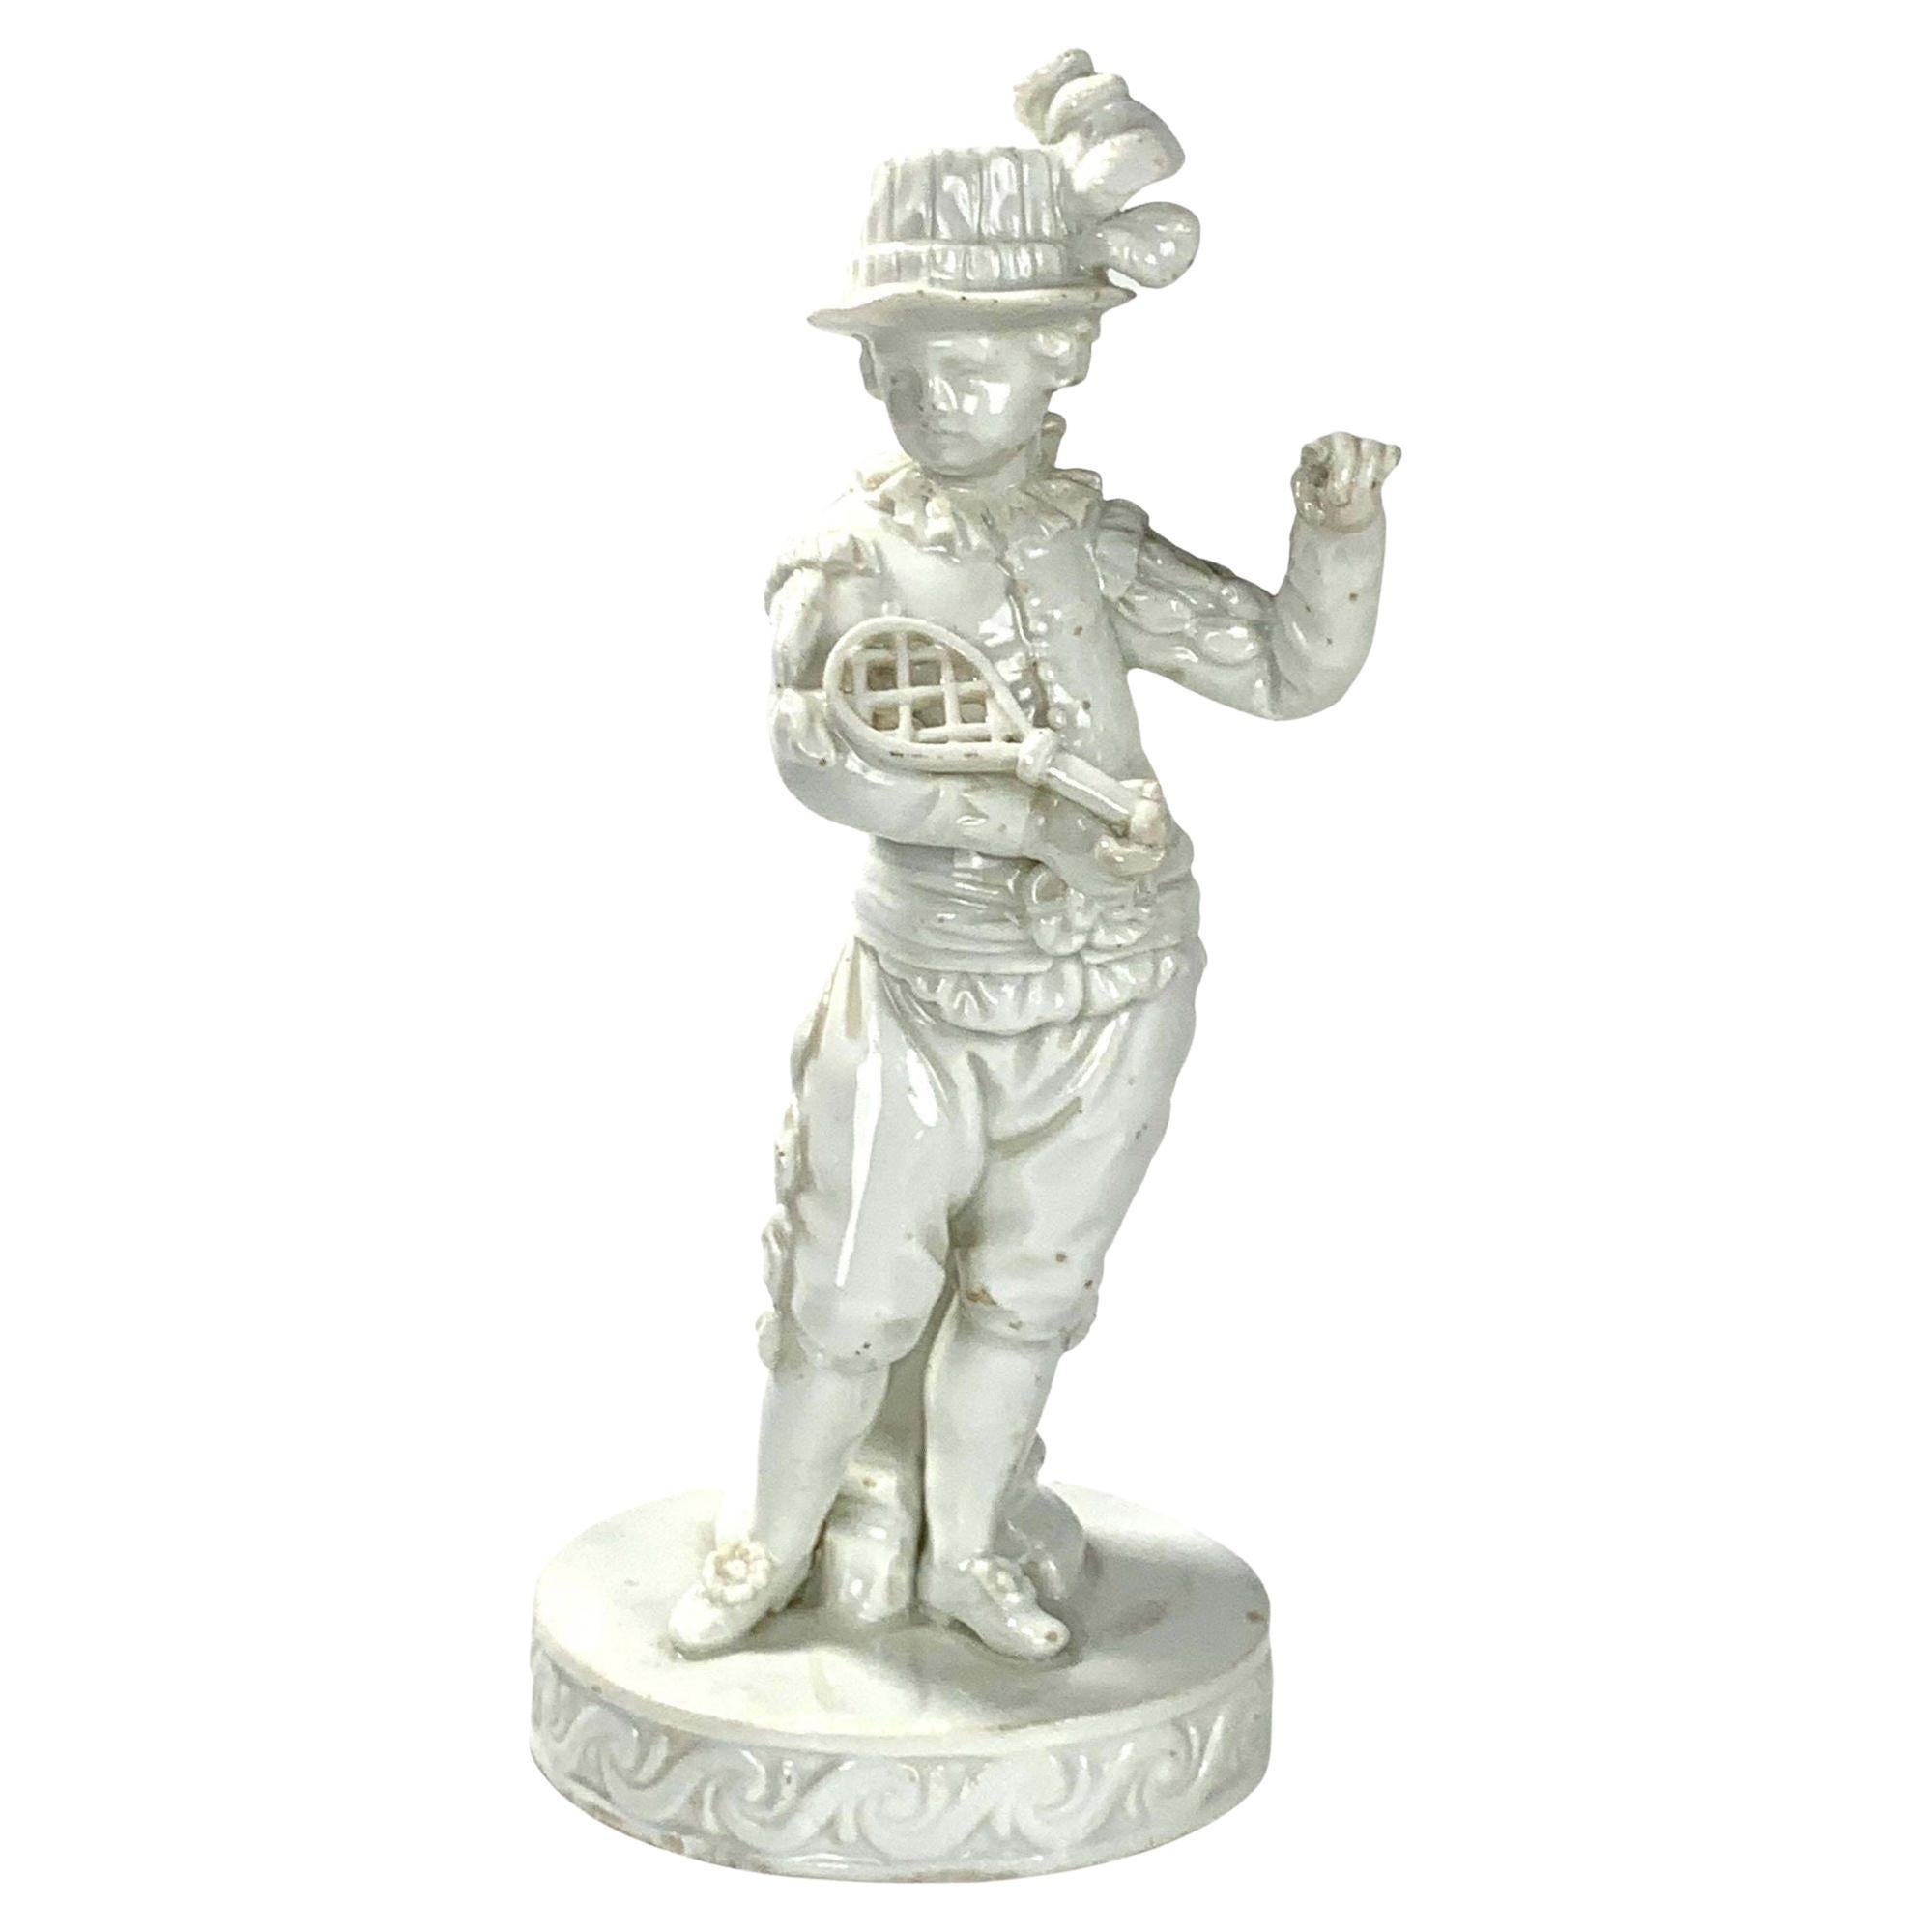 Real Tennis Porcelain Figure Germany Circa 1820 For Sale